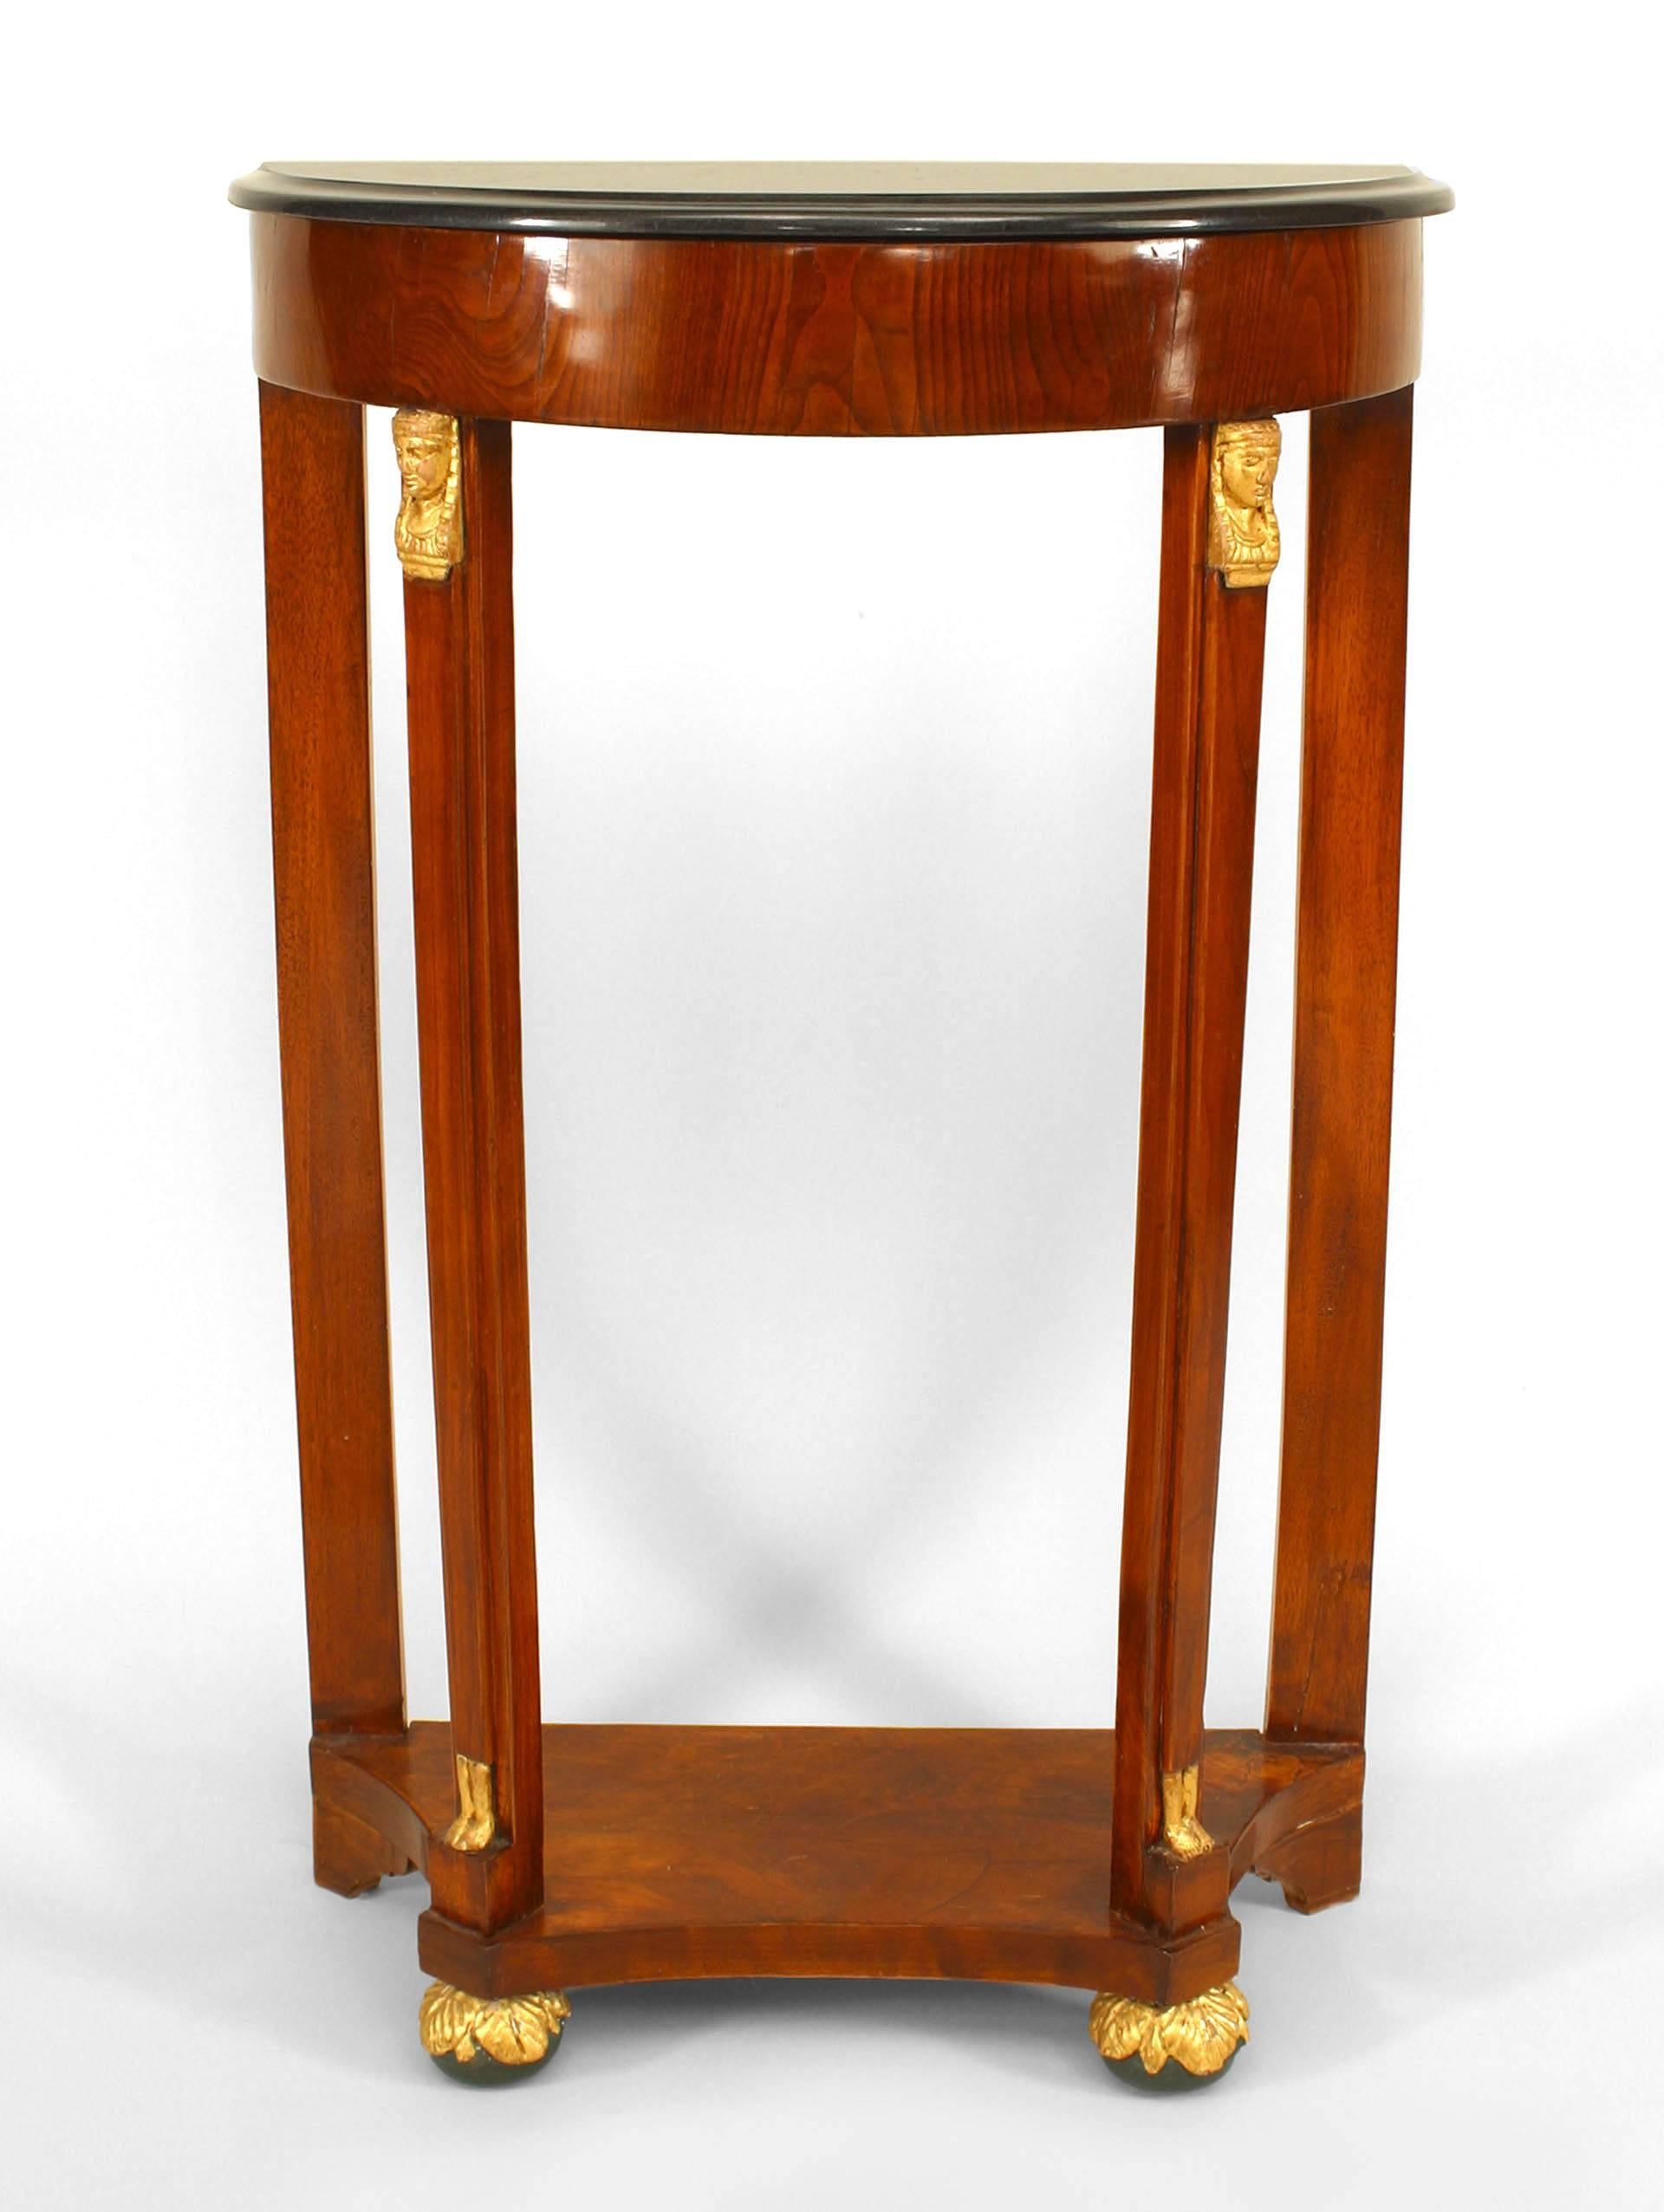 Austrian Empire console crafted circa 1830. This narrow mahogany demi-lune console feature black marble top, a platform stretcher base above ball feet, and distinctive gilt accents, such as sphinx busts and feet.